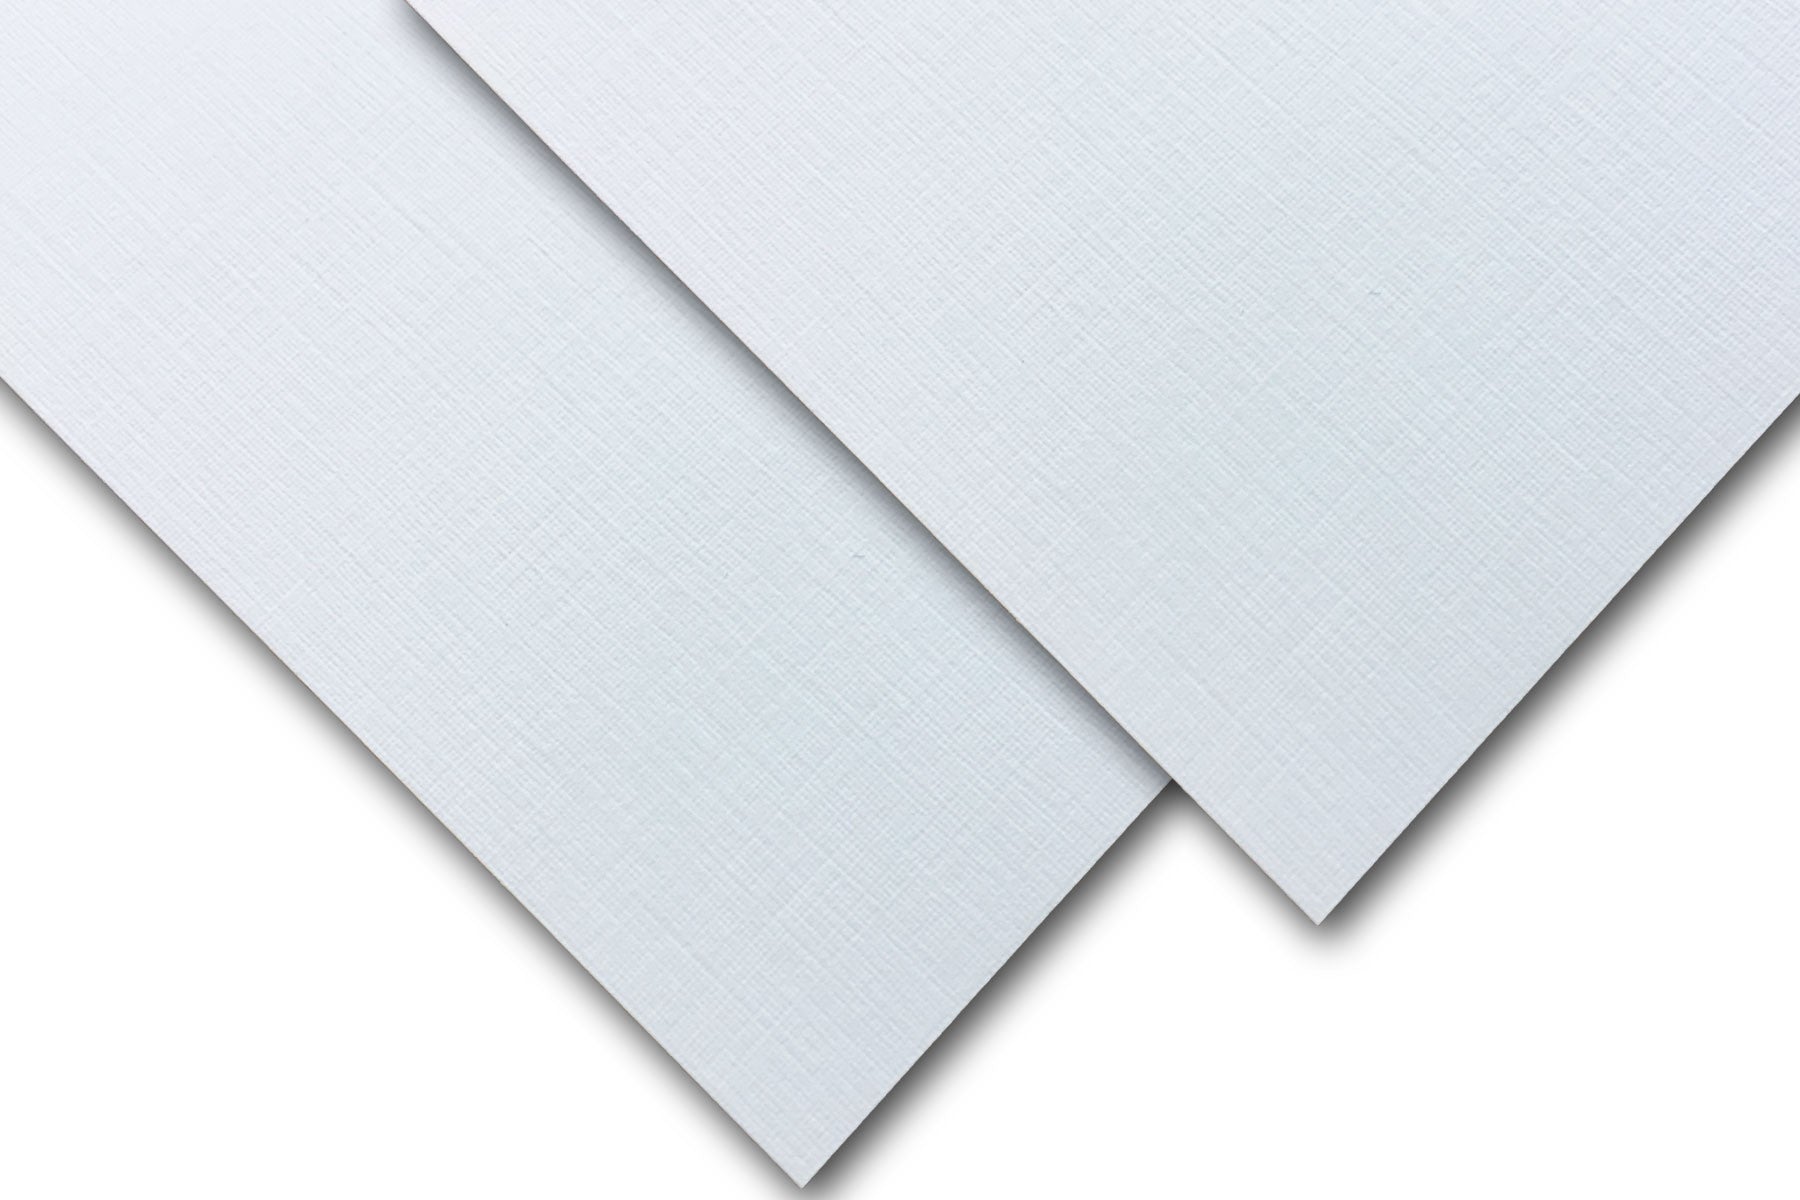 White Cardstock Paper - 8.5 x 11 50 Sheets